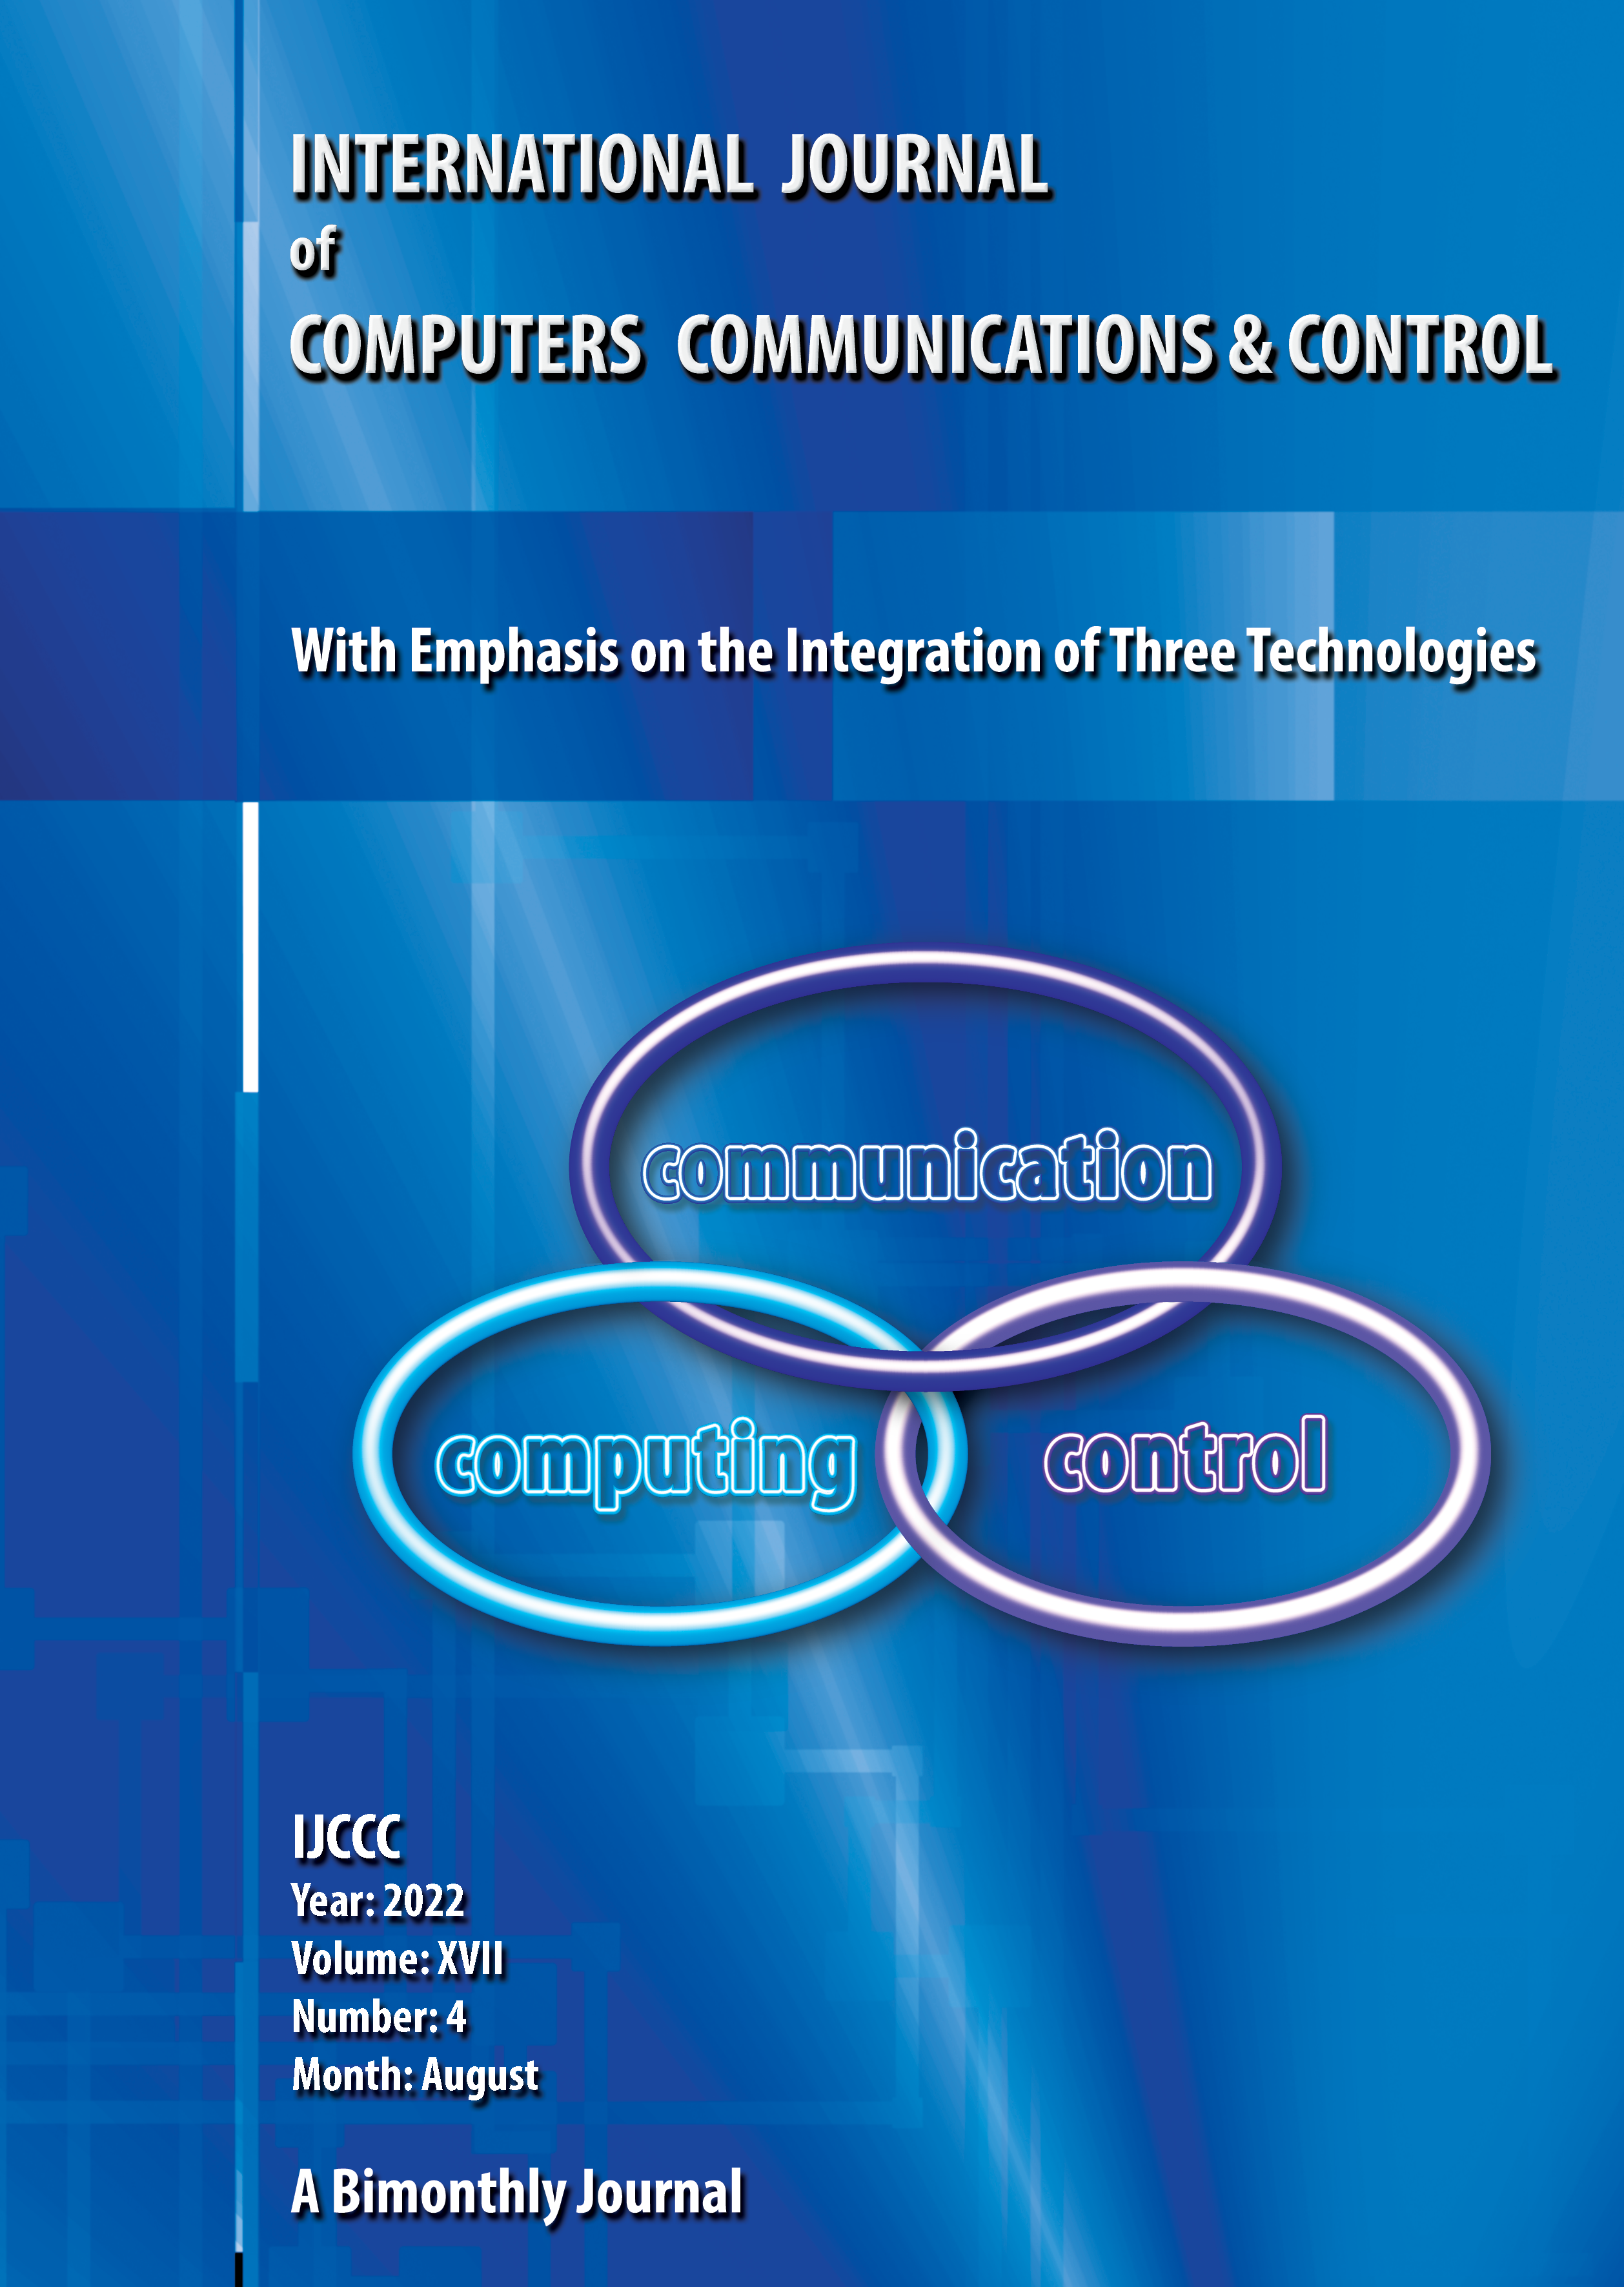 					View Vol. 17 No. 4 (2022): International Journal of Computers Communications & Control (August)
				